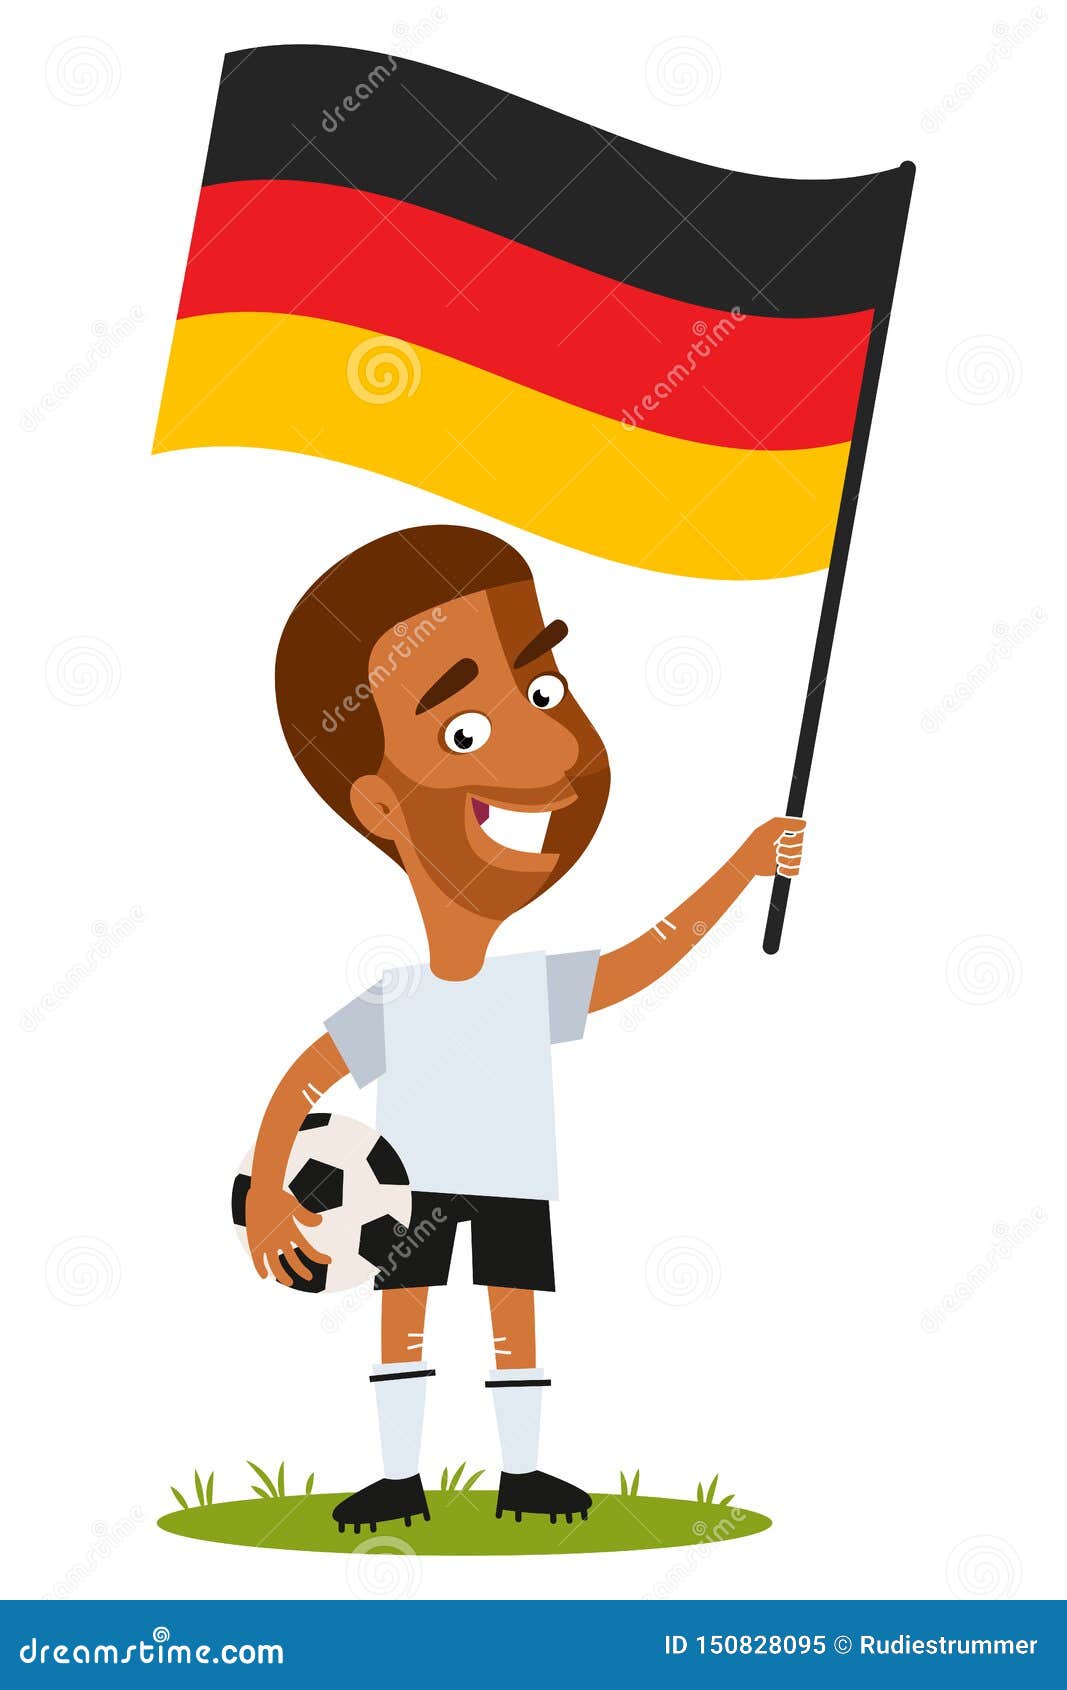 Football Player for Germany, Cartoon Man Holding German Flag Wearing White  Shirt and Black Shorts Stock Vector - Illustration of cleats, player:  150828095